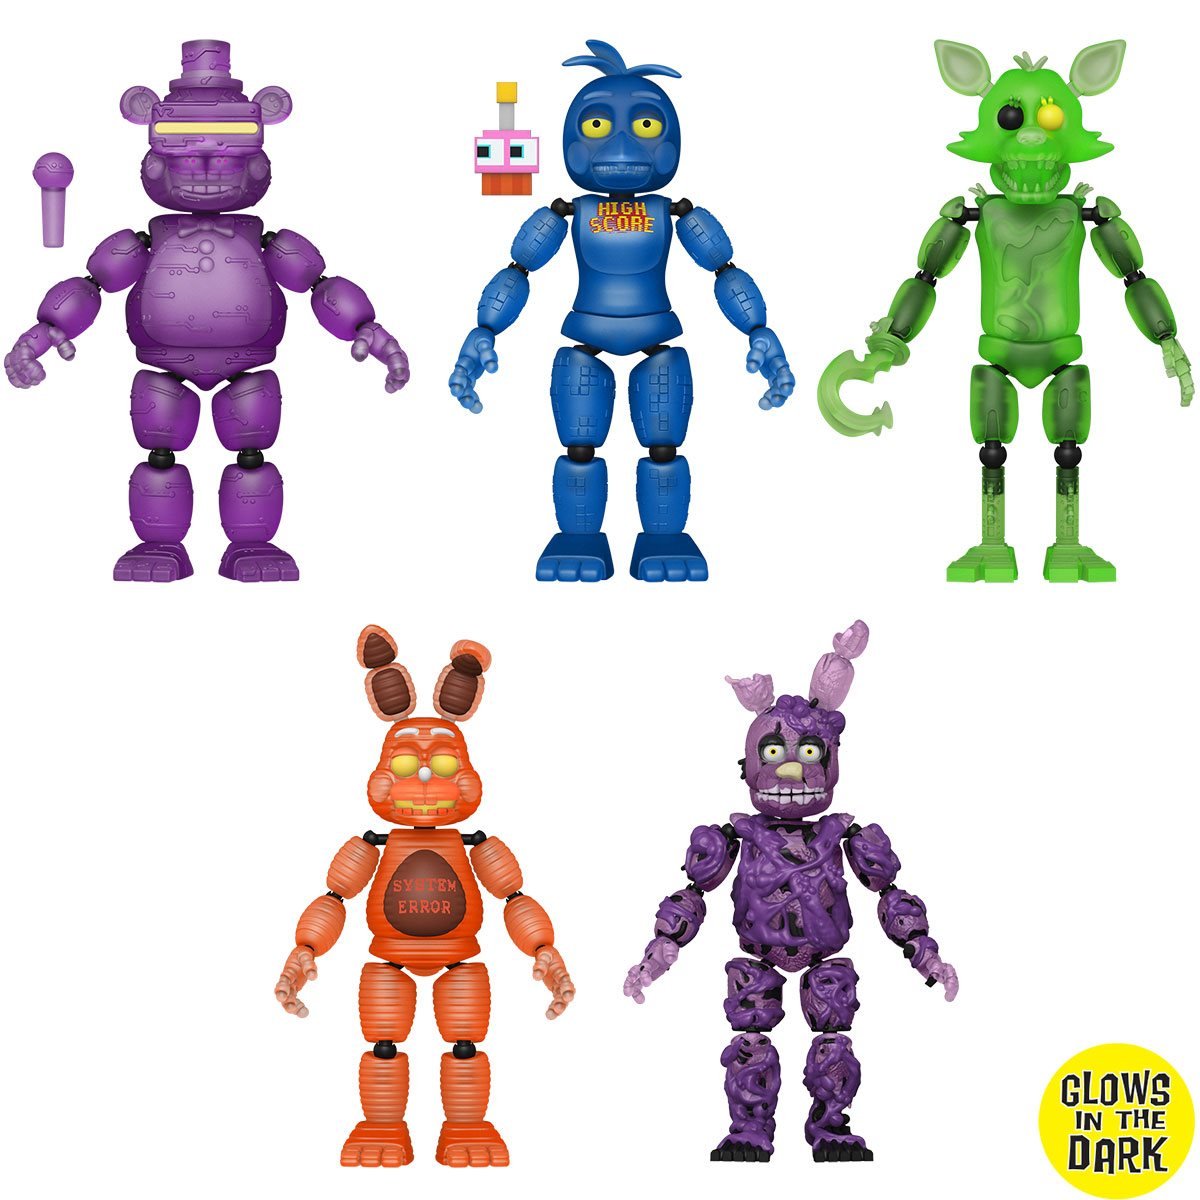 Funko Five Nights at Freddys Series 1 Freddy Action Figure Build